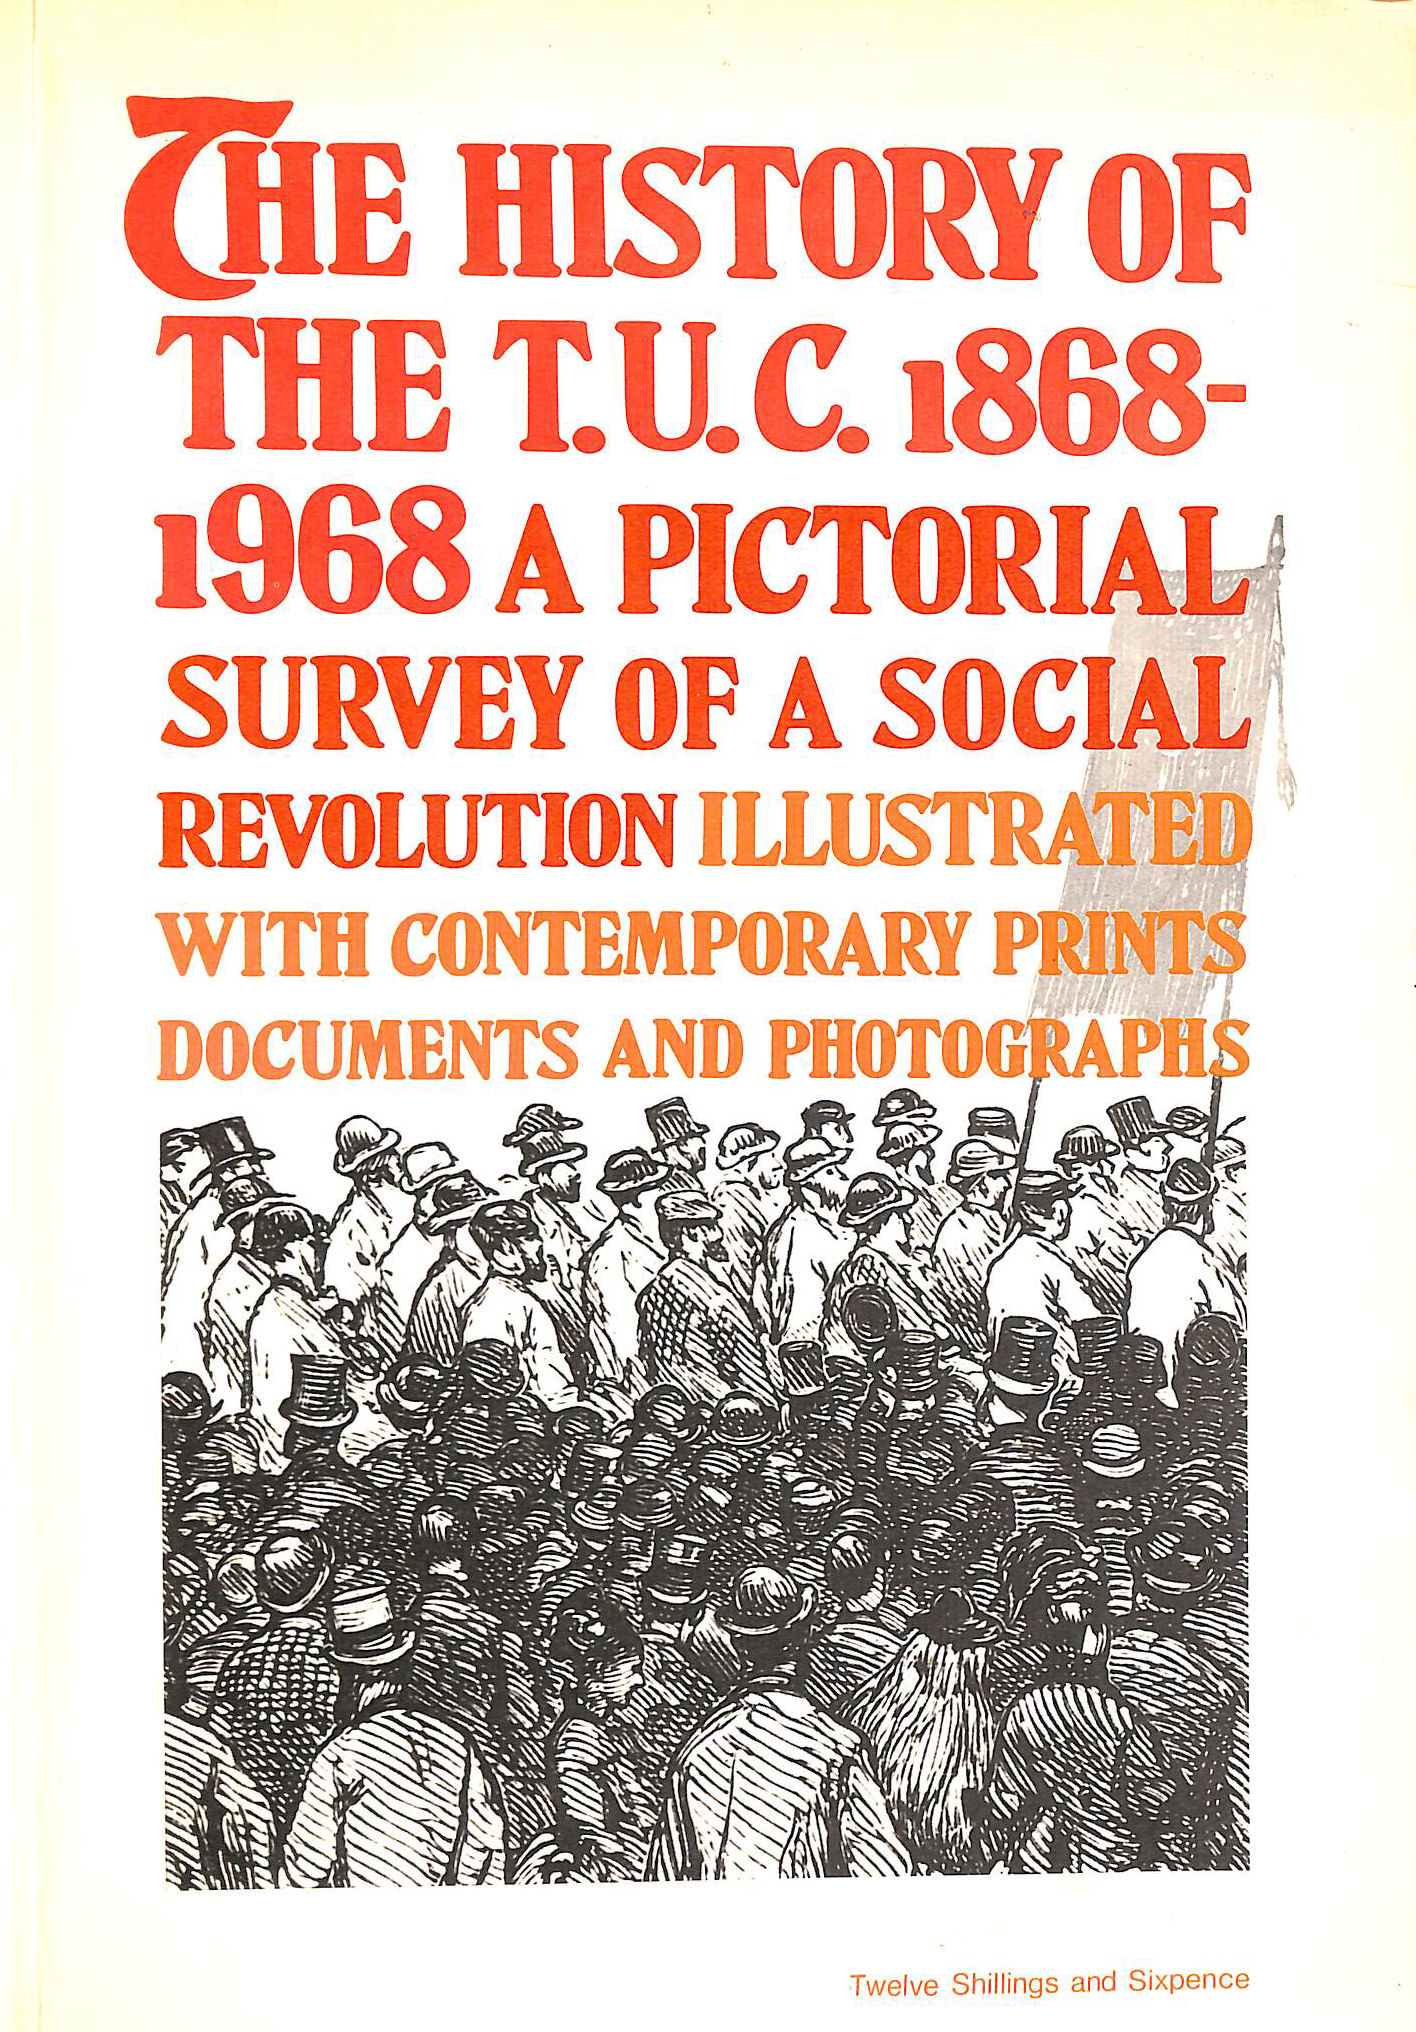 EDITOR: LIONEL BIRCH - The History of the T. U. C. 1868-1968: a Pictorial Survey of a Social Revolution; Additional Research and Assistance from the Staff of the Trades Union Congress